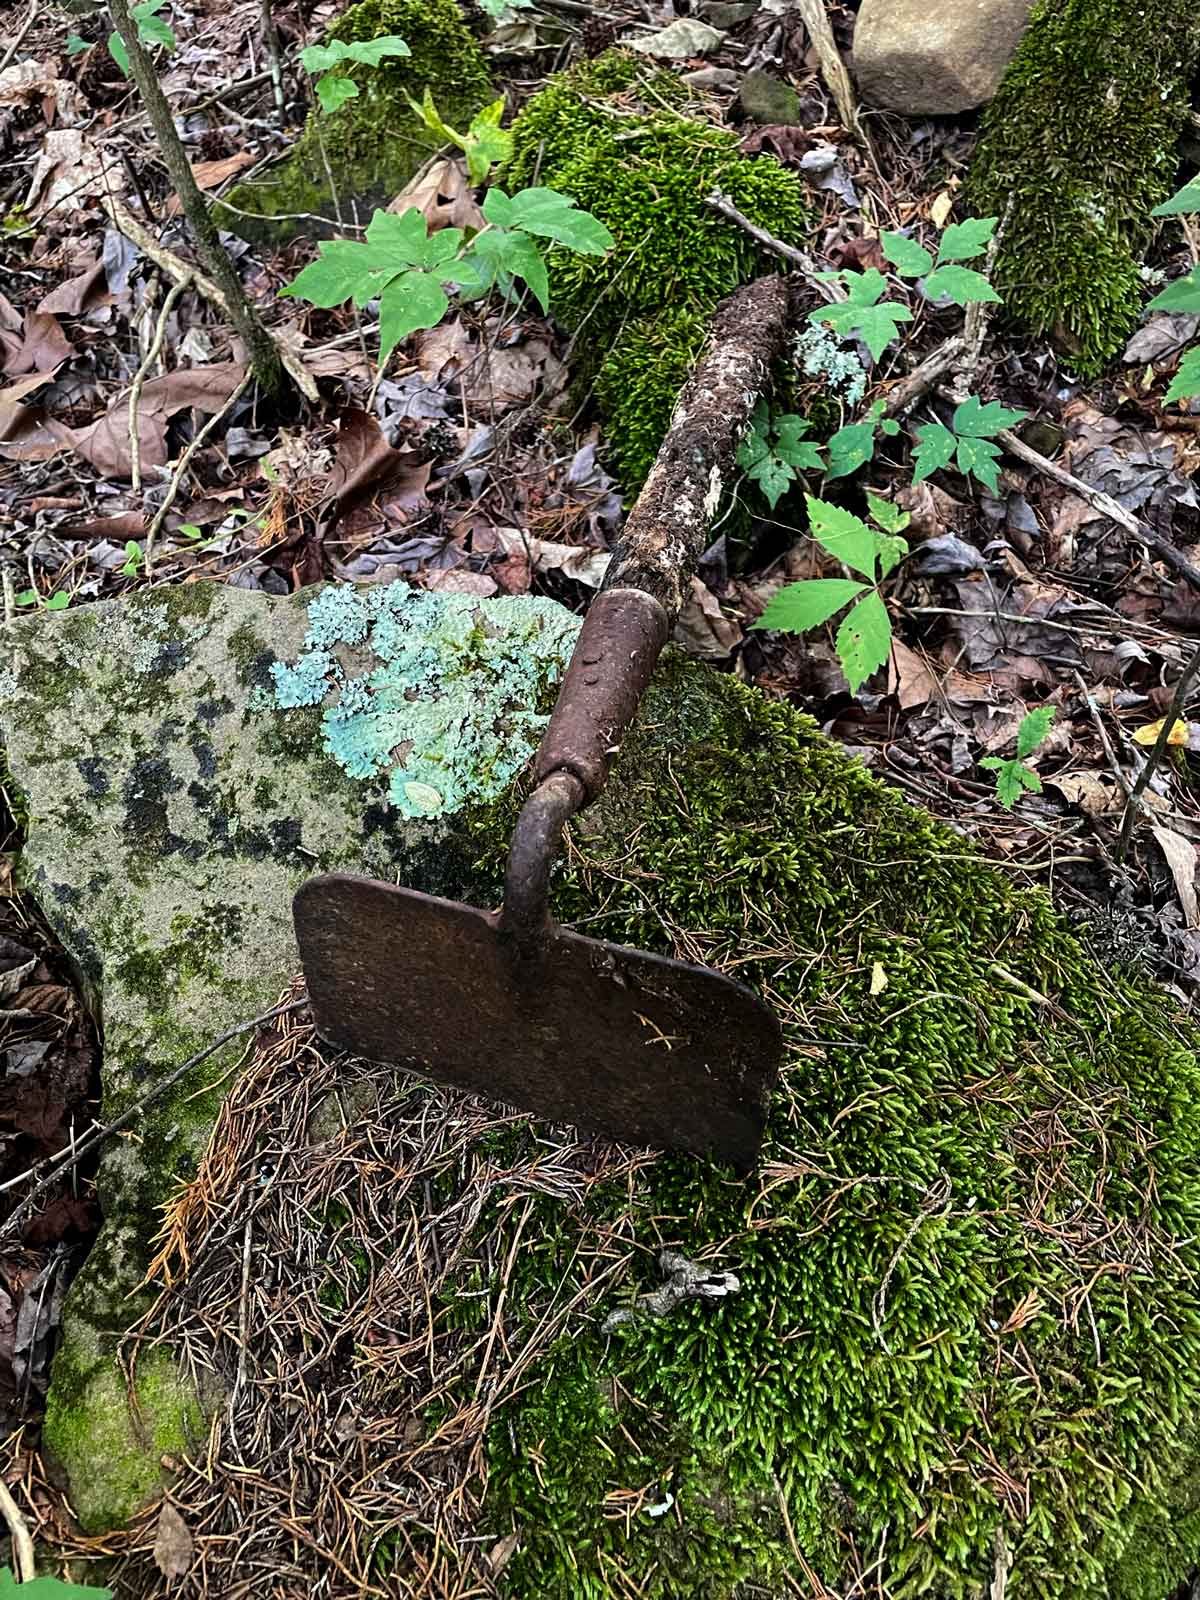 An old hoe forgotten on a mossy rock.